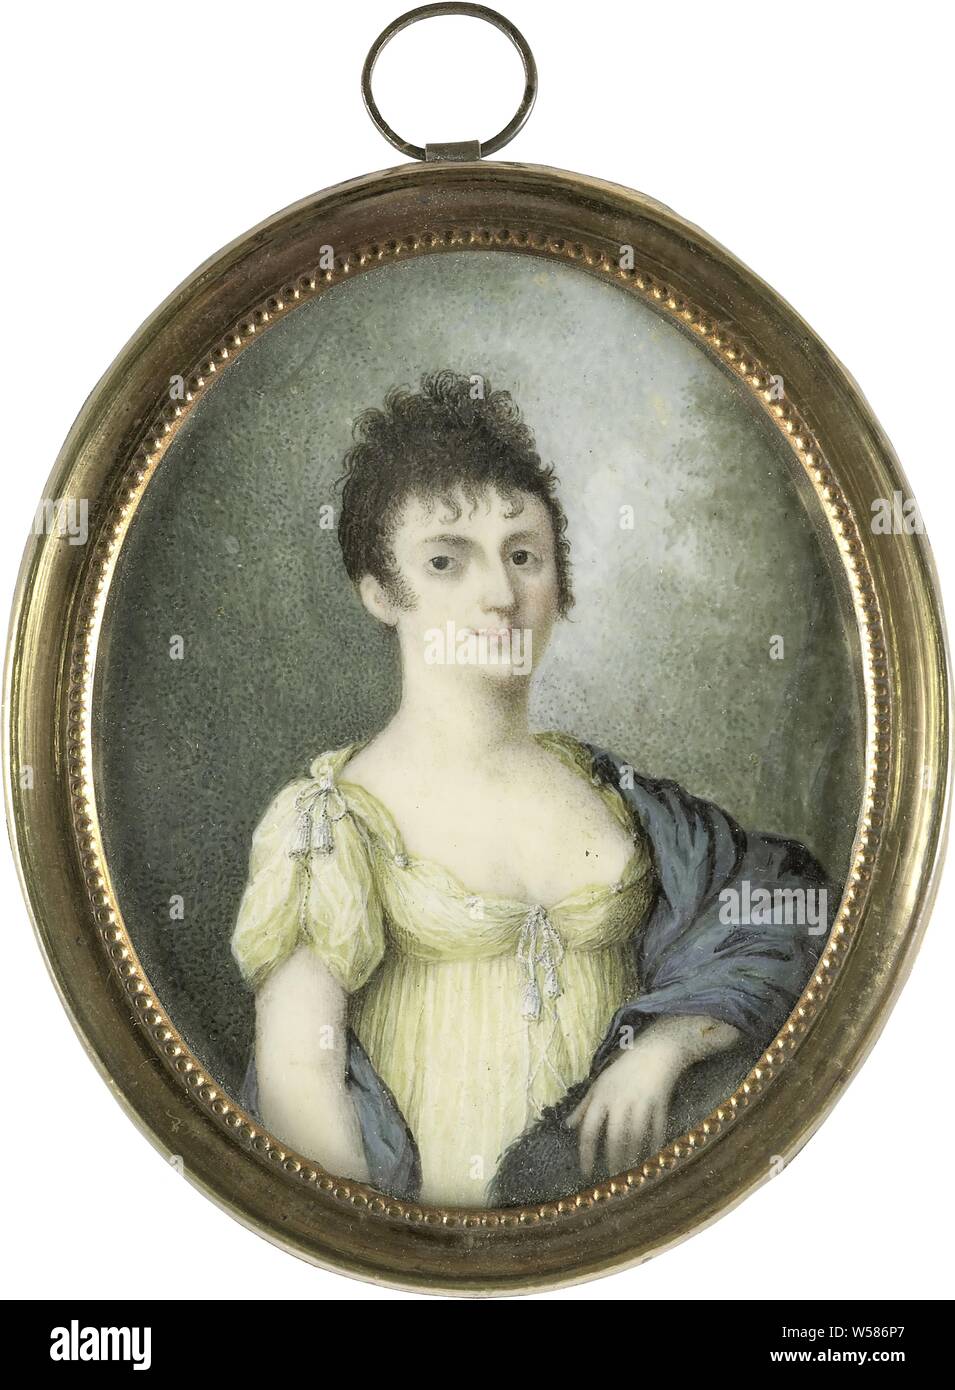 Portrait of a woman, Portrait of a woman. Half-length, standing, slightly to the right, looking at the viewer., anonymous, Northern Netherlands, c. 1805, ivory, metal, glass, h 7.6 cm × w 5.7 cm h 9.5 cm × w 7 cm × d 0.6 cm Stock Photo